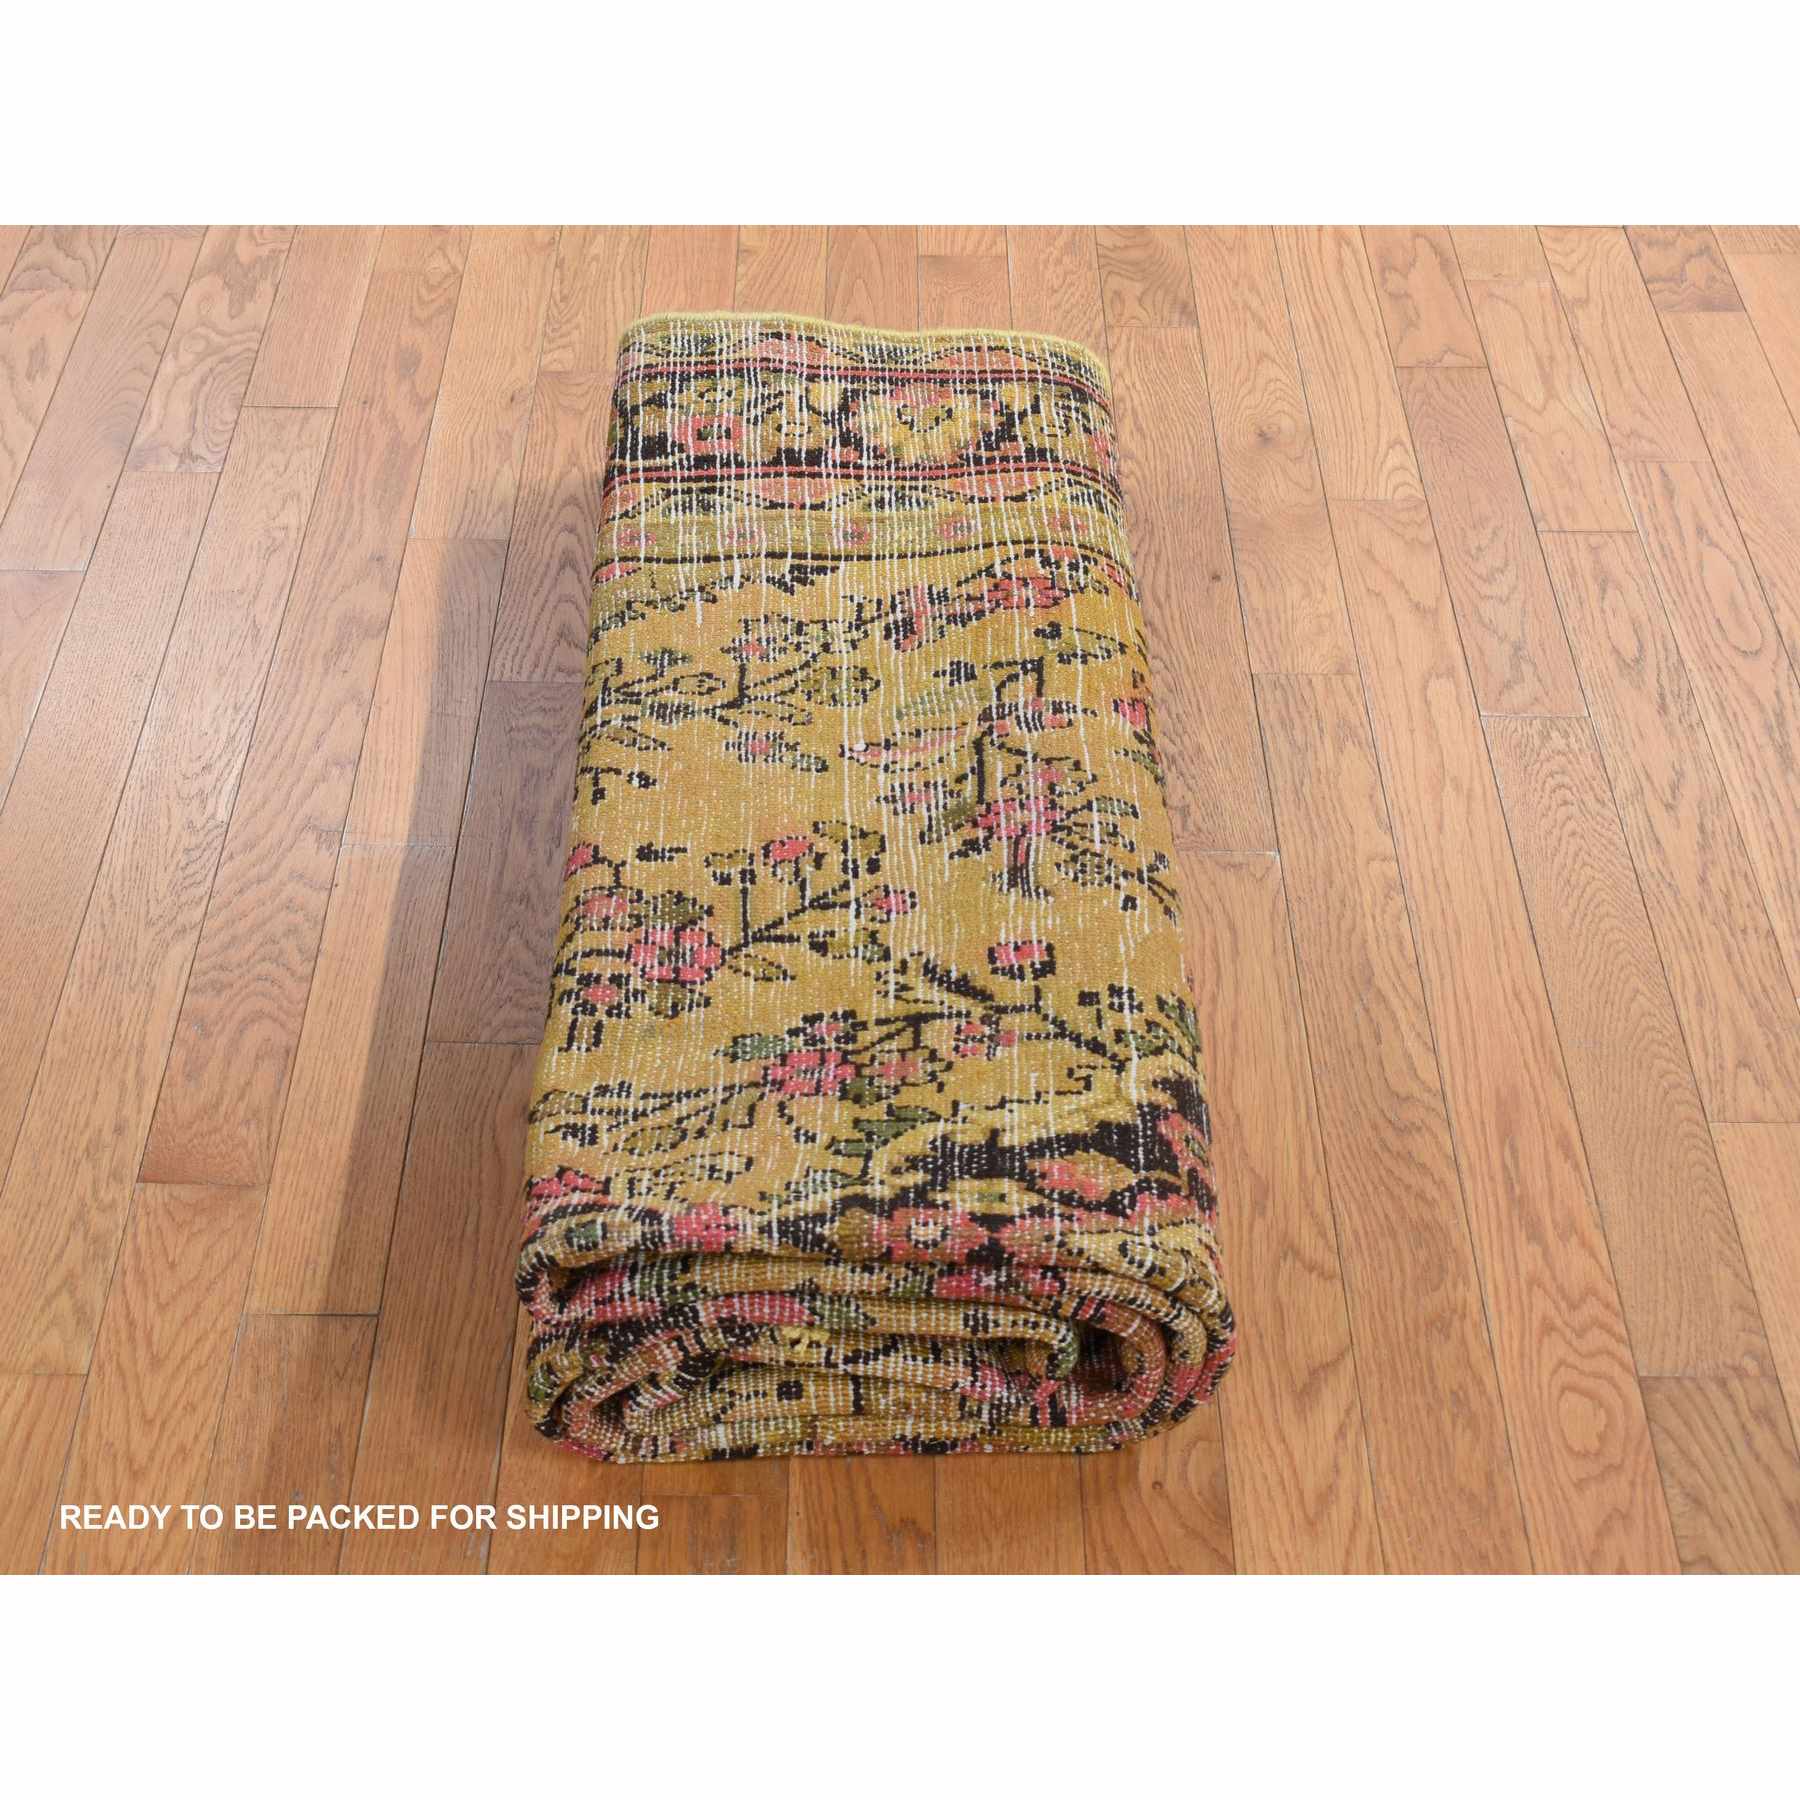 Overdyed-Vintage-Hand-Knotted-Rug-404685